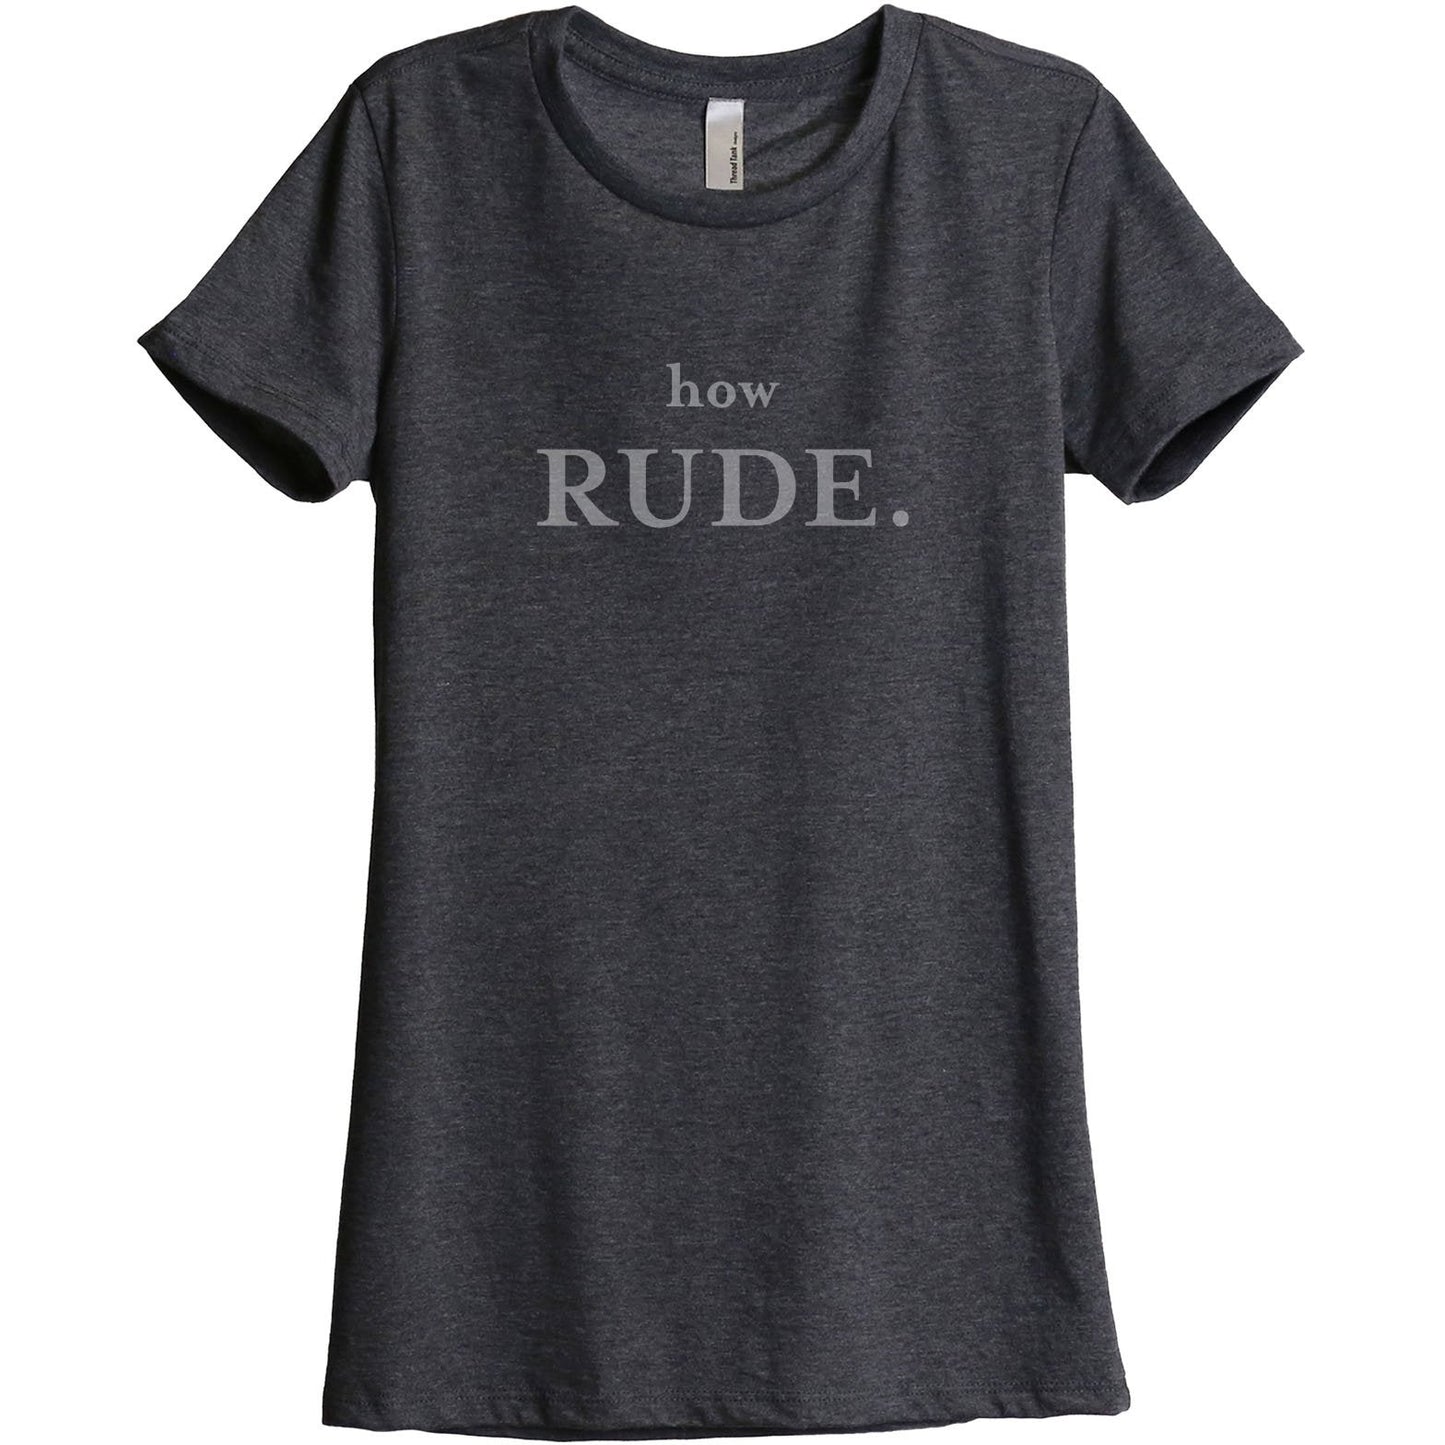 How Rude Women's Relaxed Crewneck T-Shirt Top Tee Charcoal Grey
